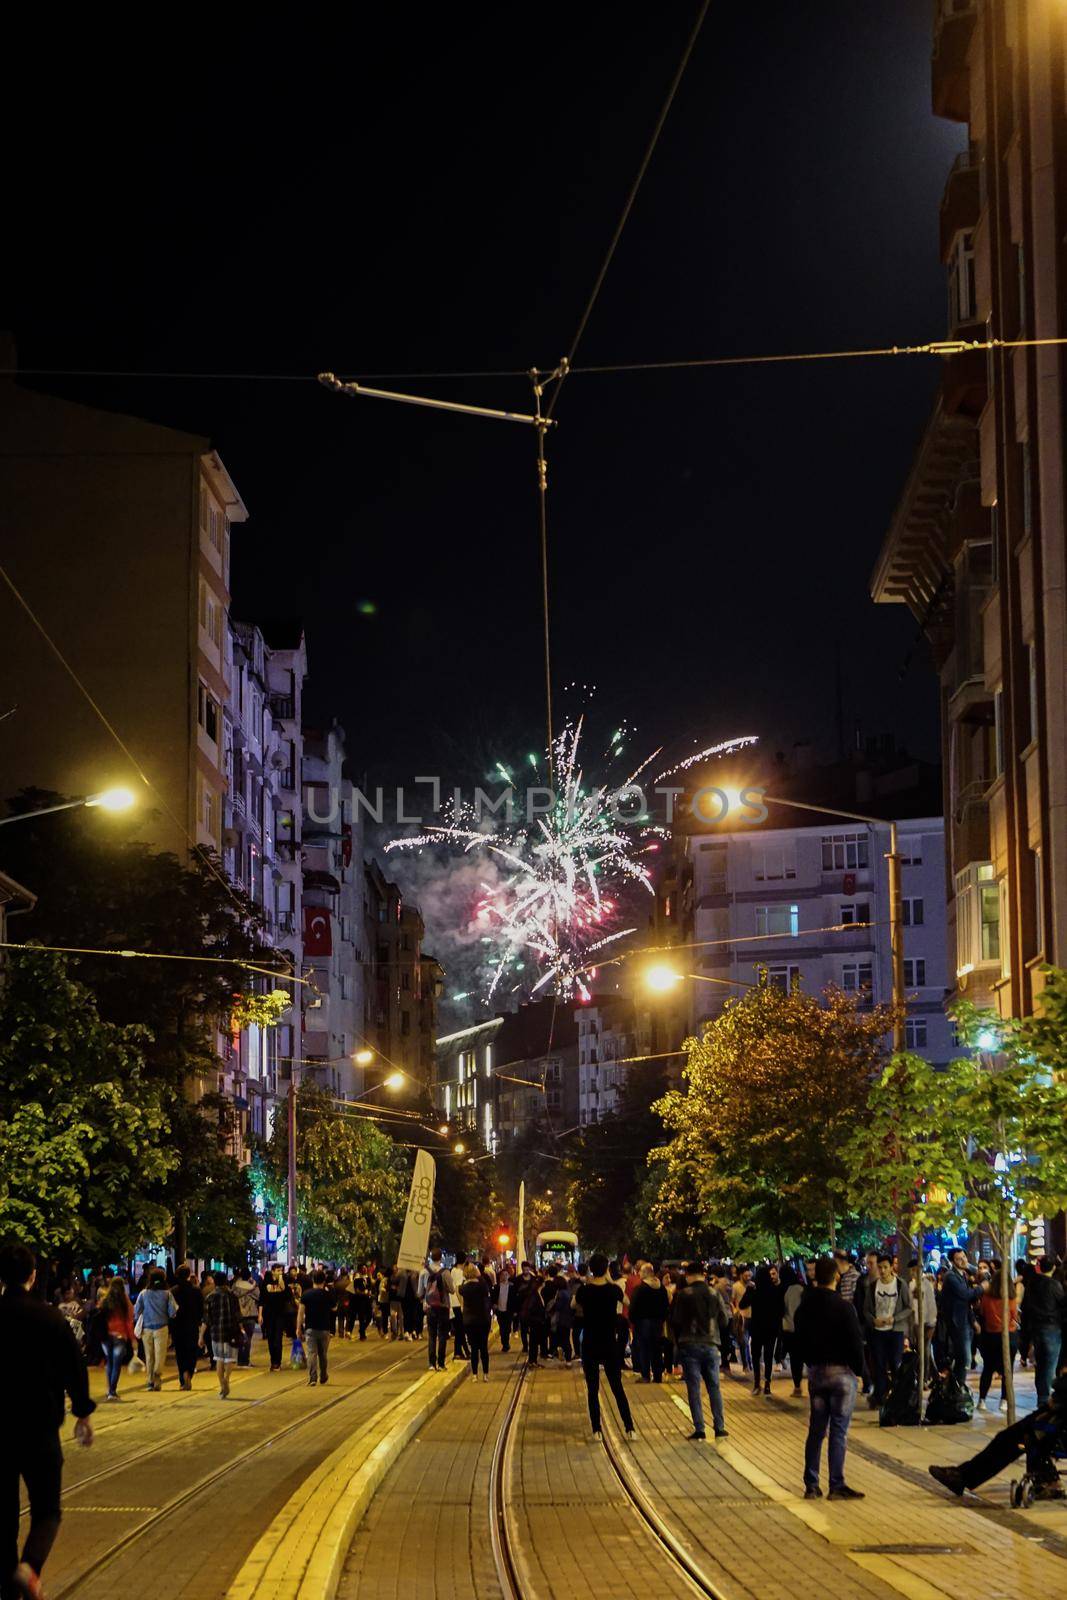 19 May 2019 Eskisehir, Turkey. 19 May National independence and sovereignty day celebrations in Eskisehir by tasci